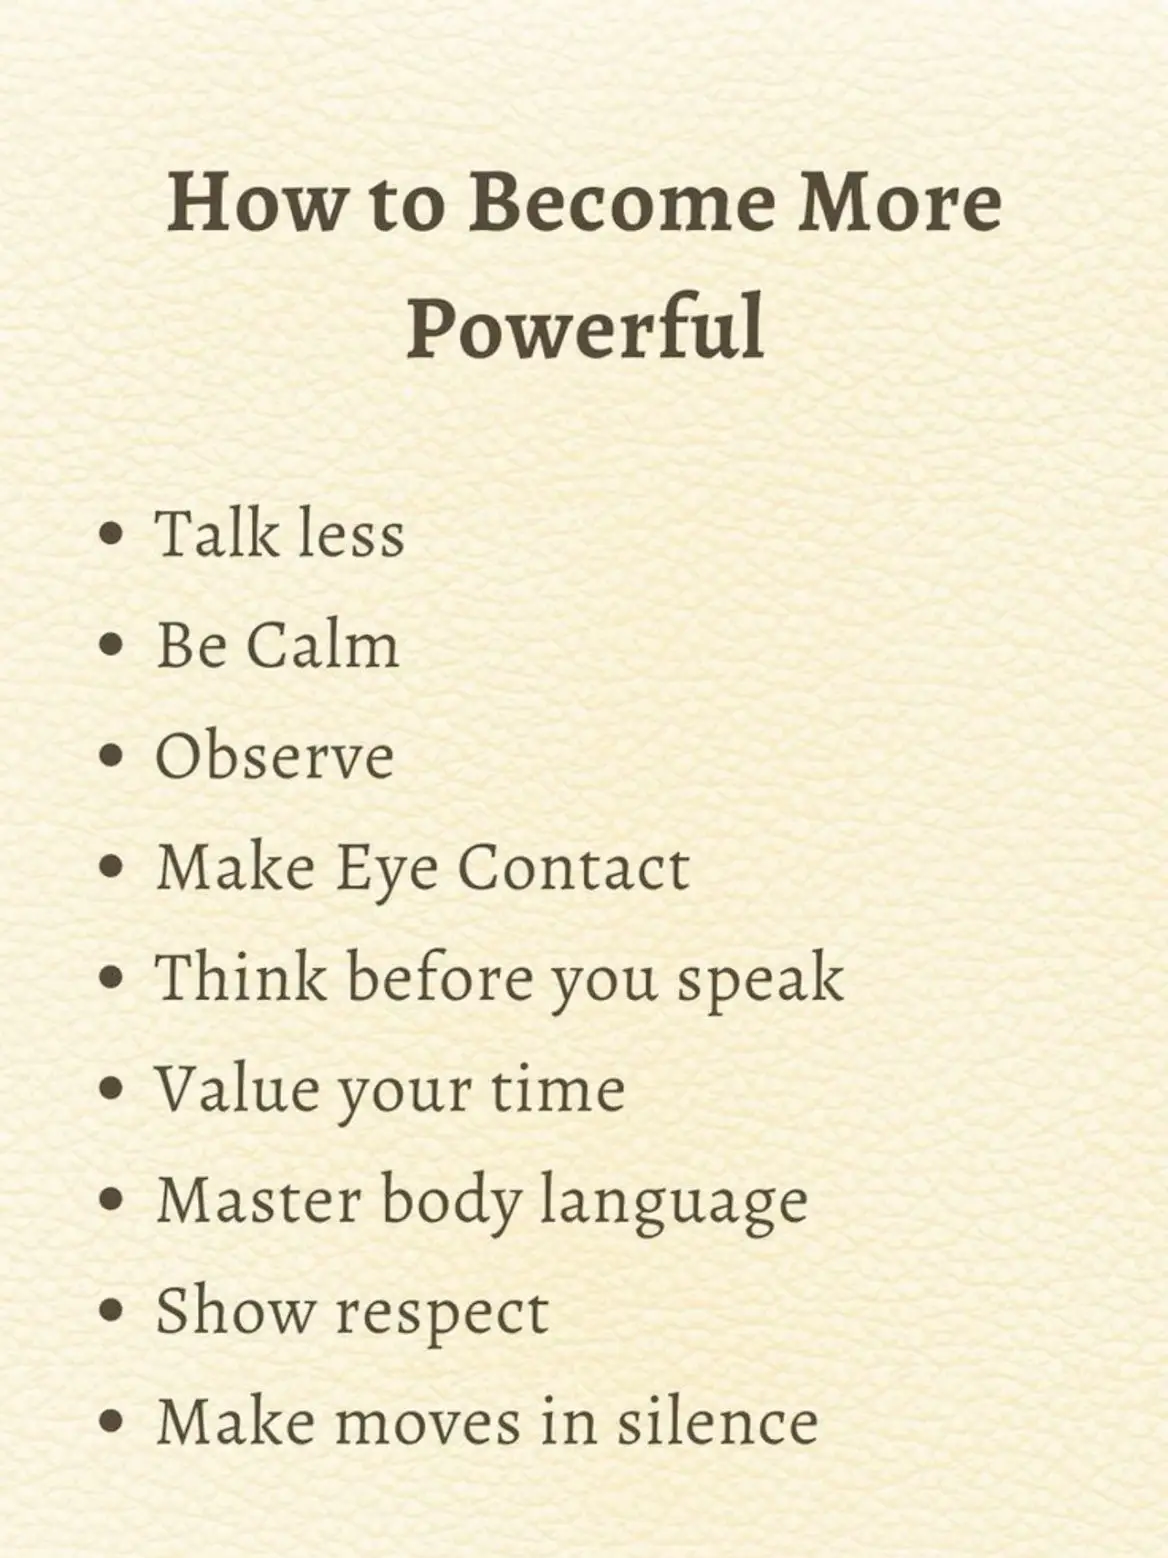  A list of things to do when becoming more powerful.